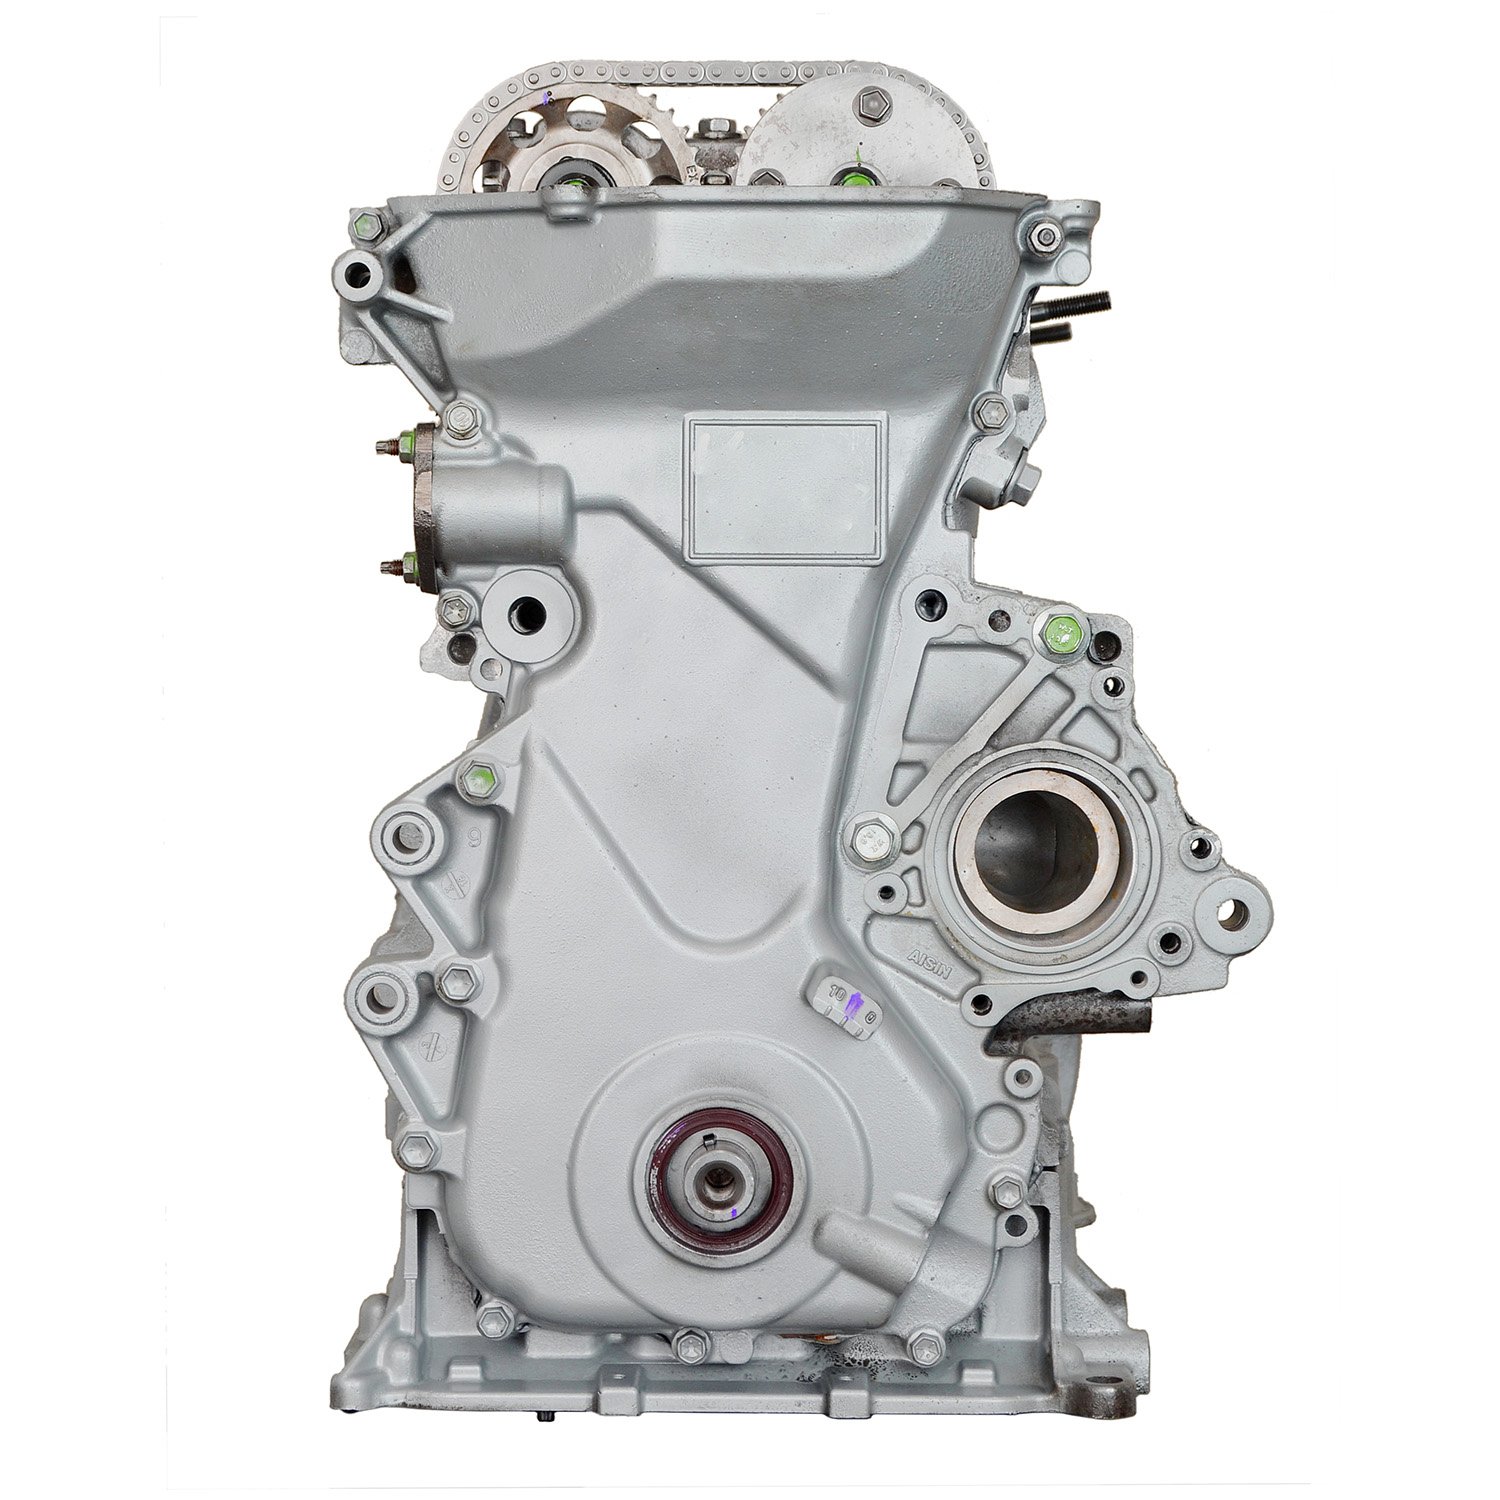 Remanufactured Crate Engine for 2000-2005 Toyota Celica, MR2